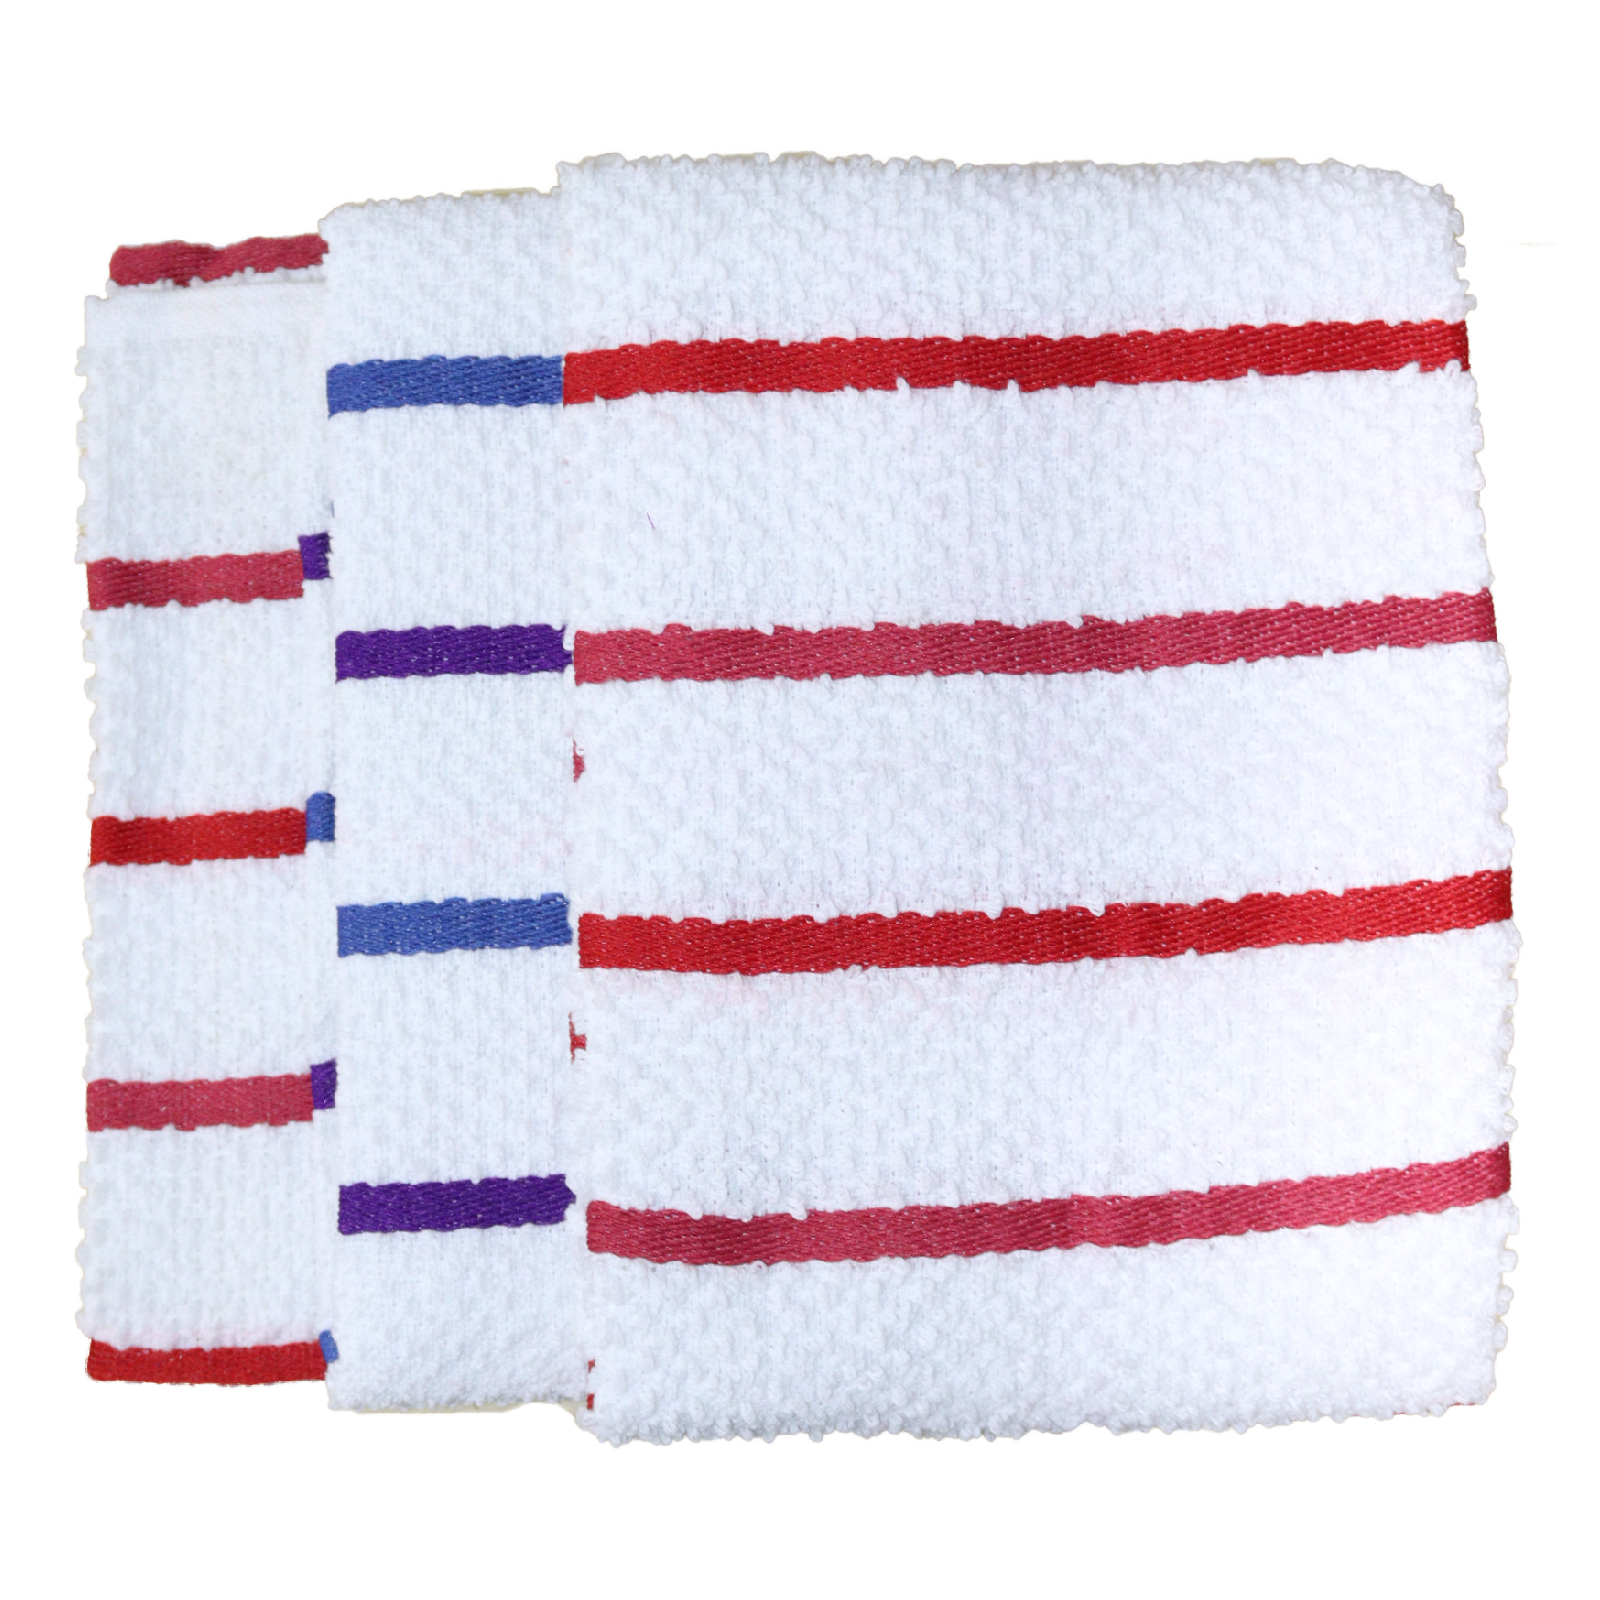 3 Pc 100% Cotton Serene Kitchen Towel)( Pack of 3) -Dusting towel, Hand towel